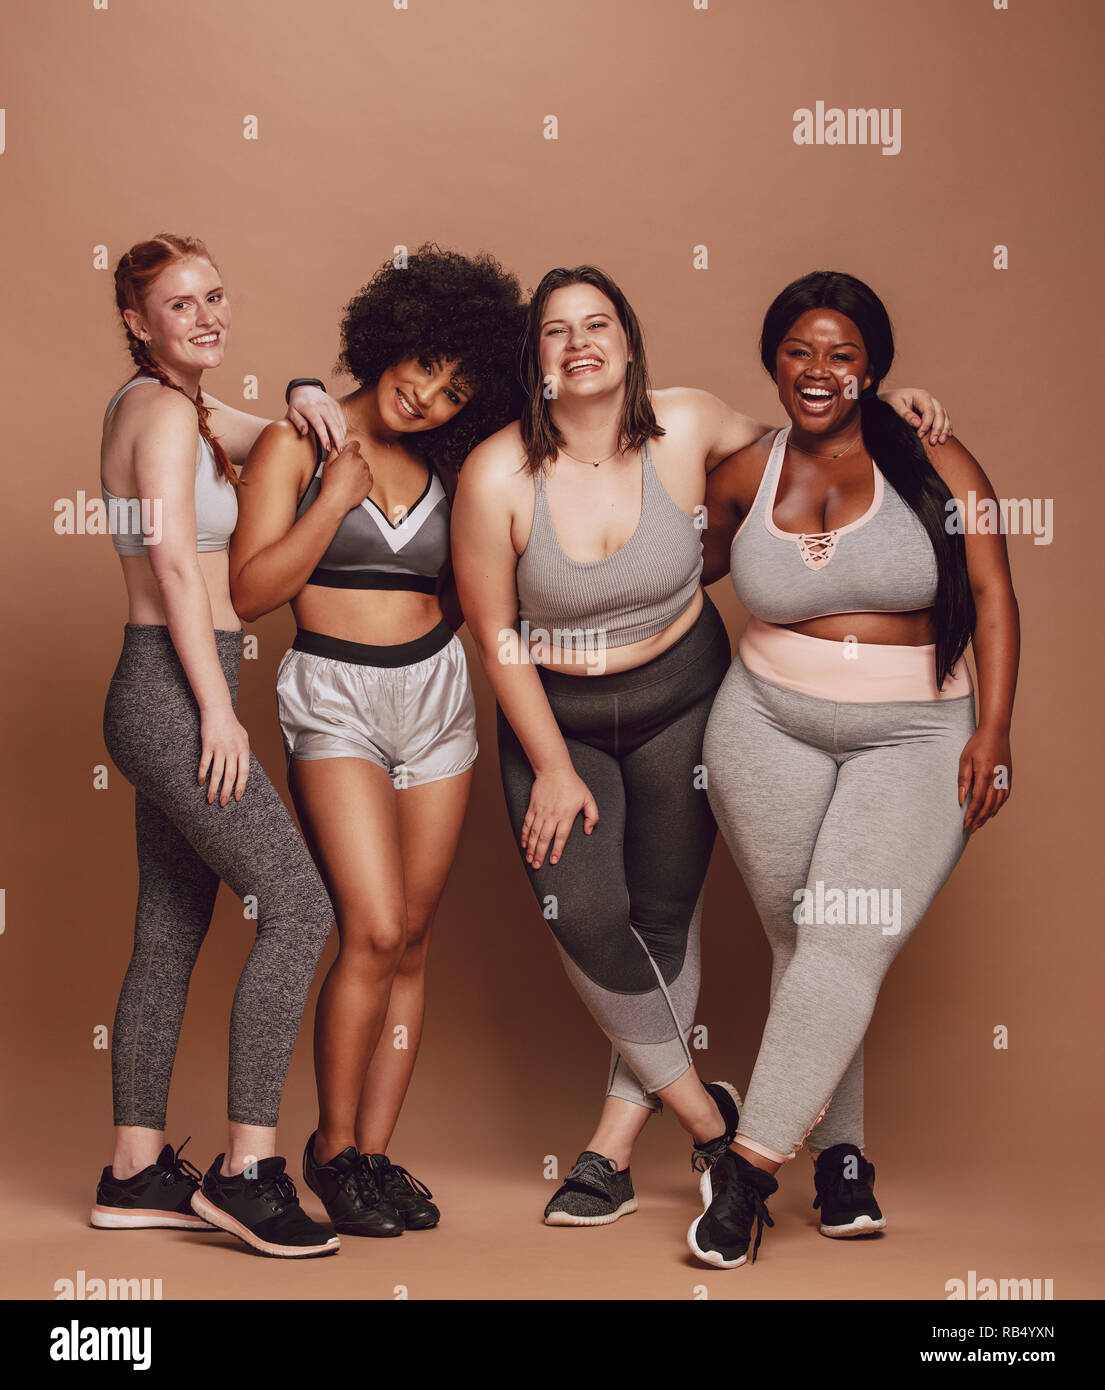 Group of women of different race, figure type and size in